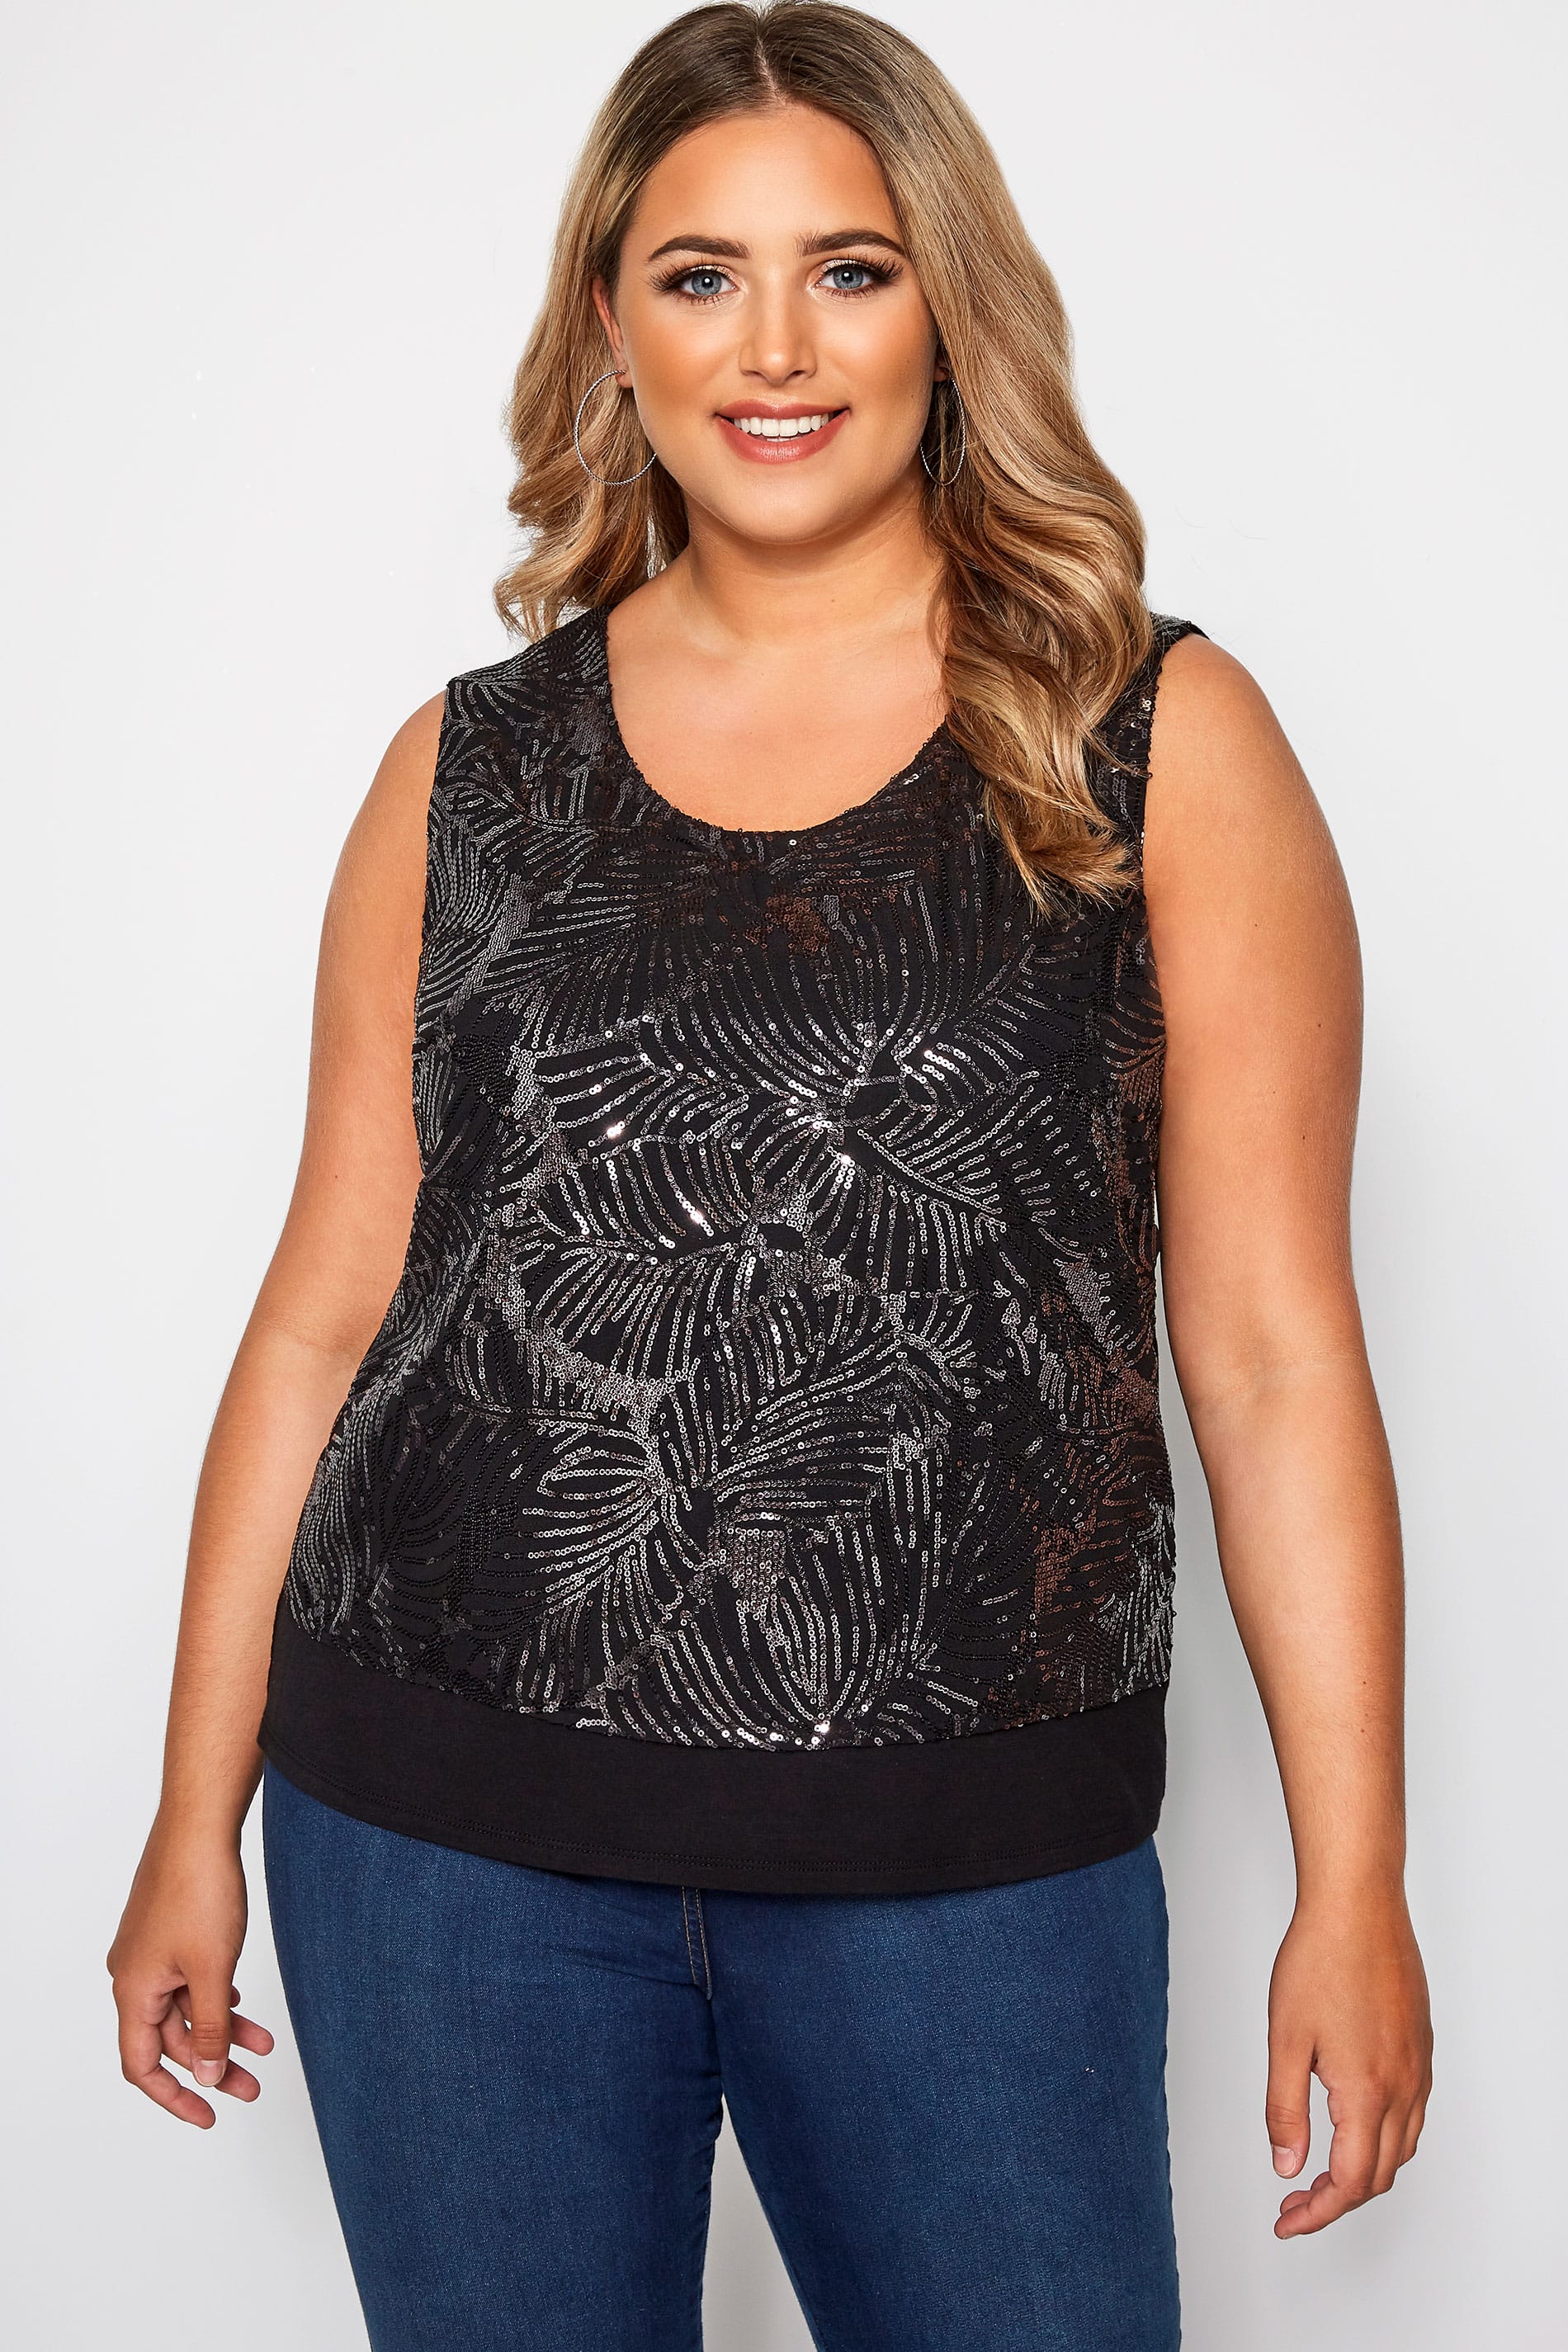 SIZE UP Black Sequin Jersey Top | Sizes 16 to 32 | Yours Clothing